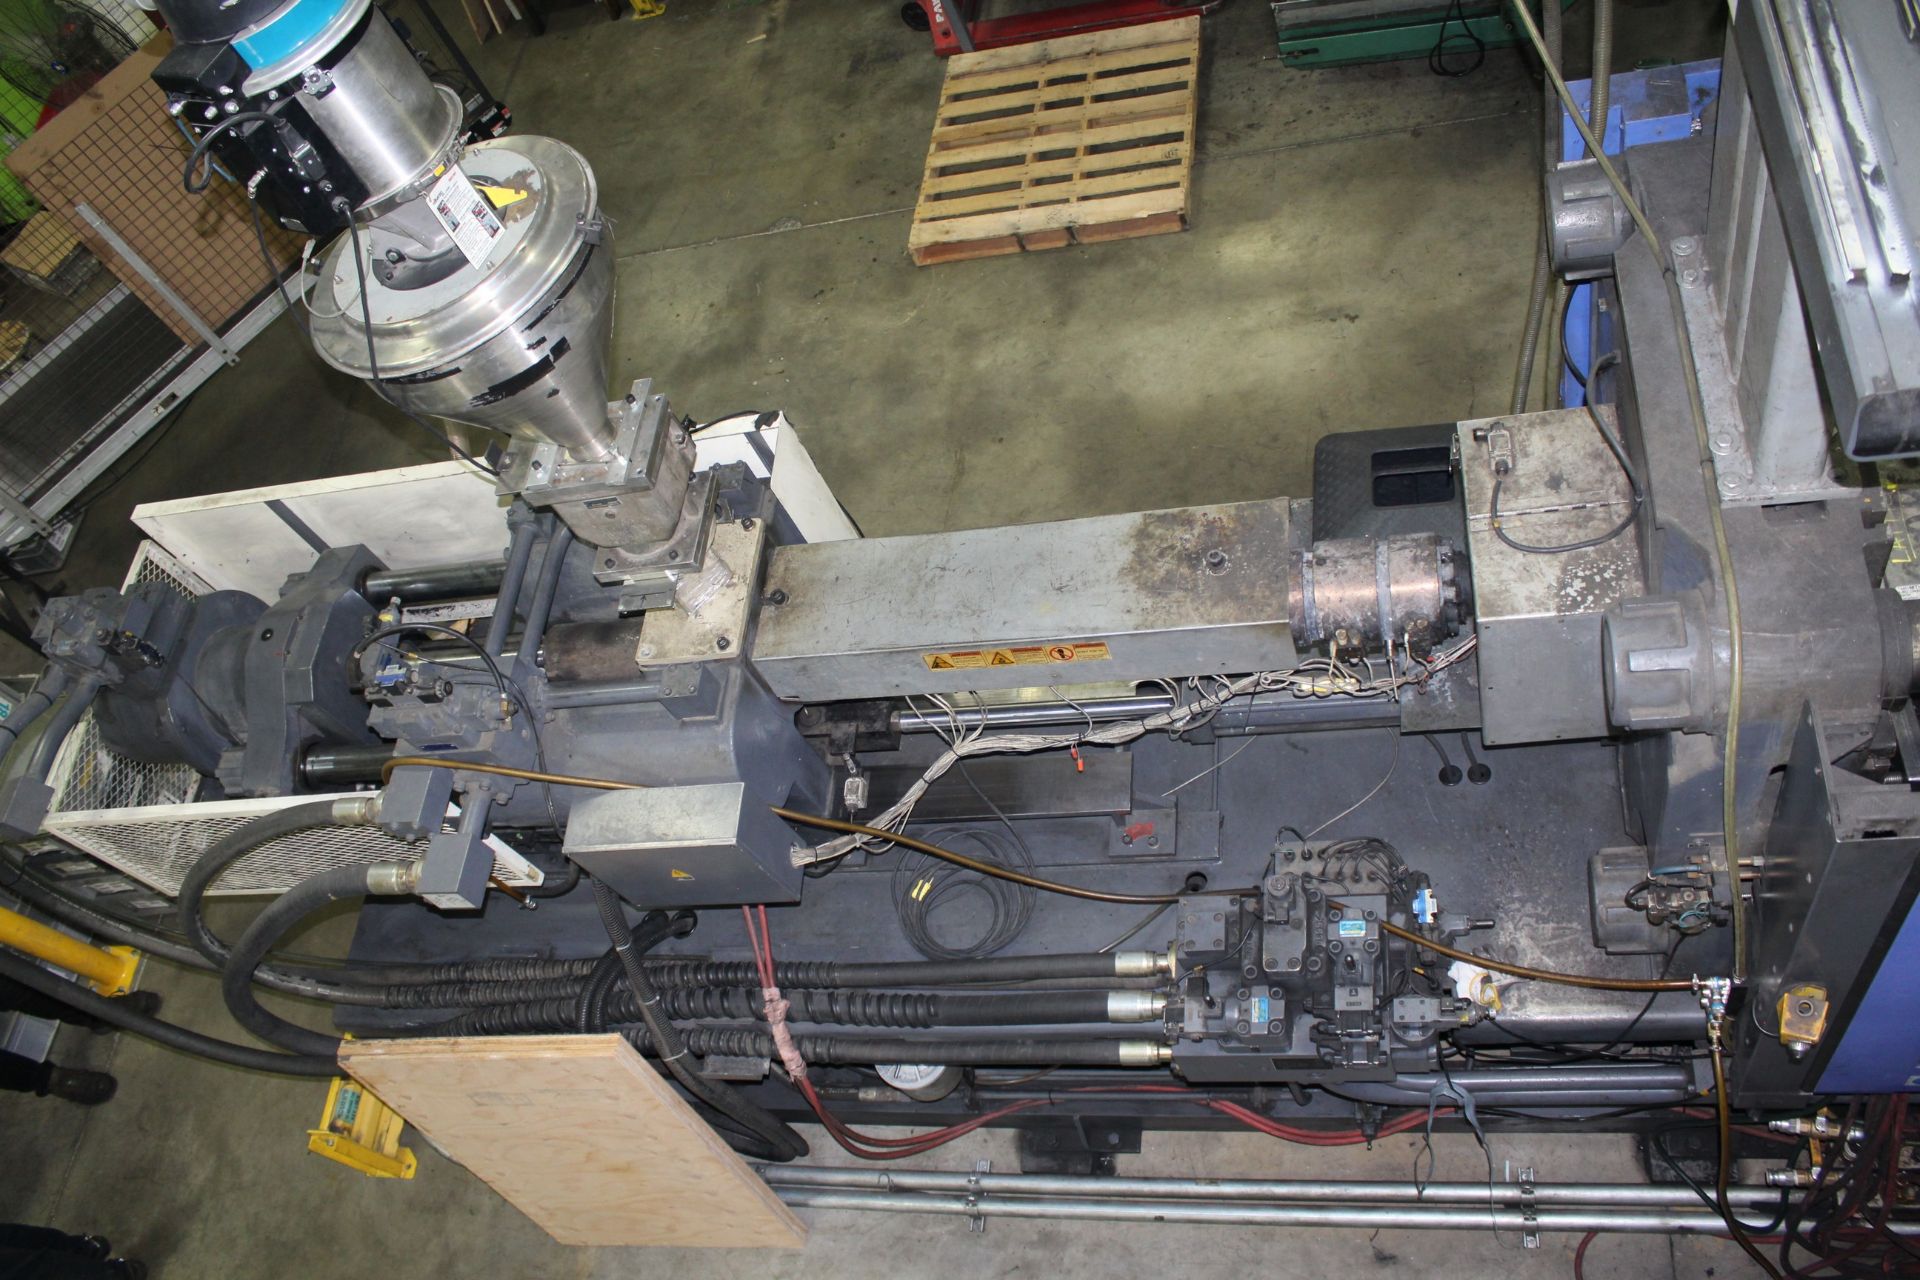 LG GOLD STAR 500H INJECTION MOLDER, 500-TON CAP. - Image 10 of 38